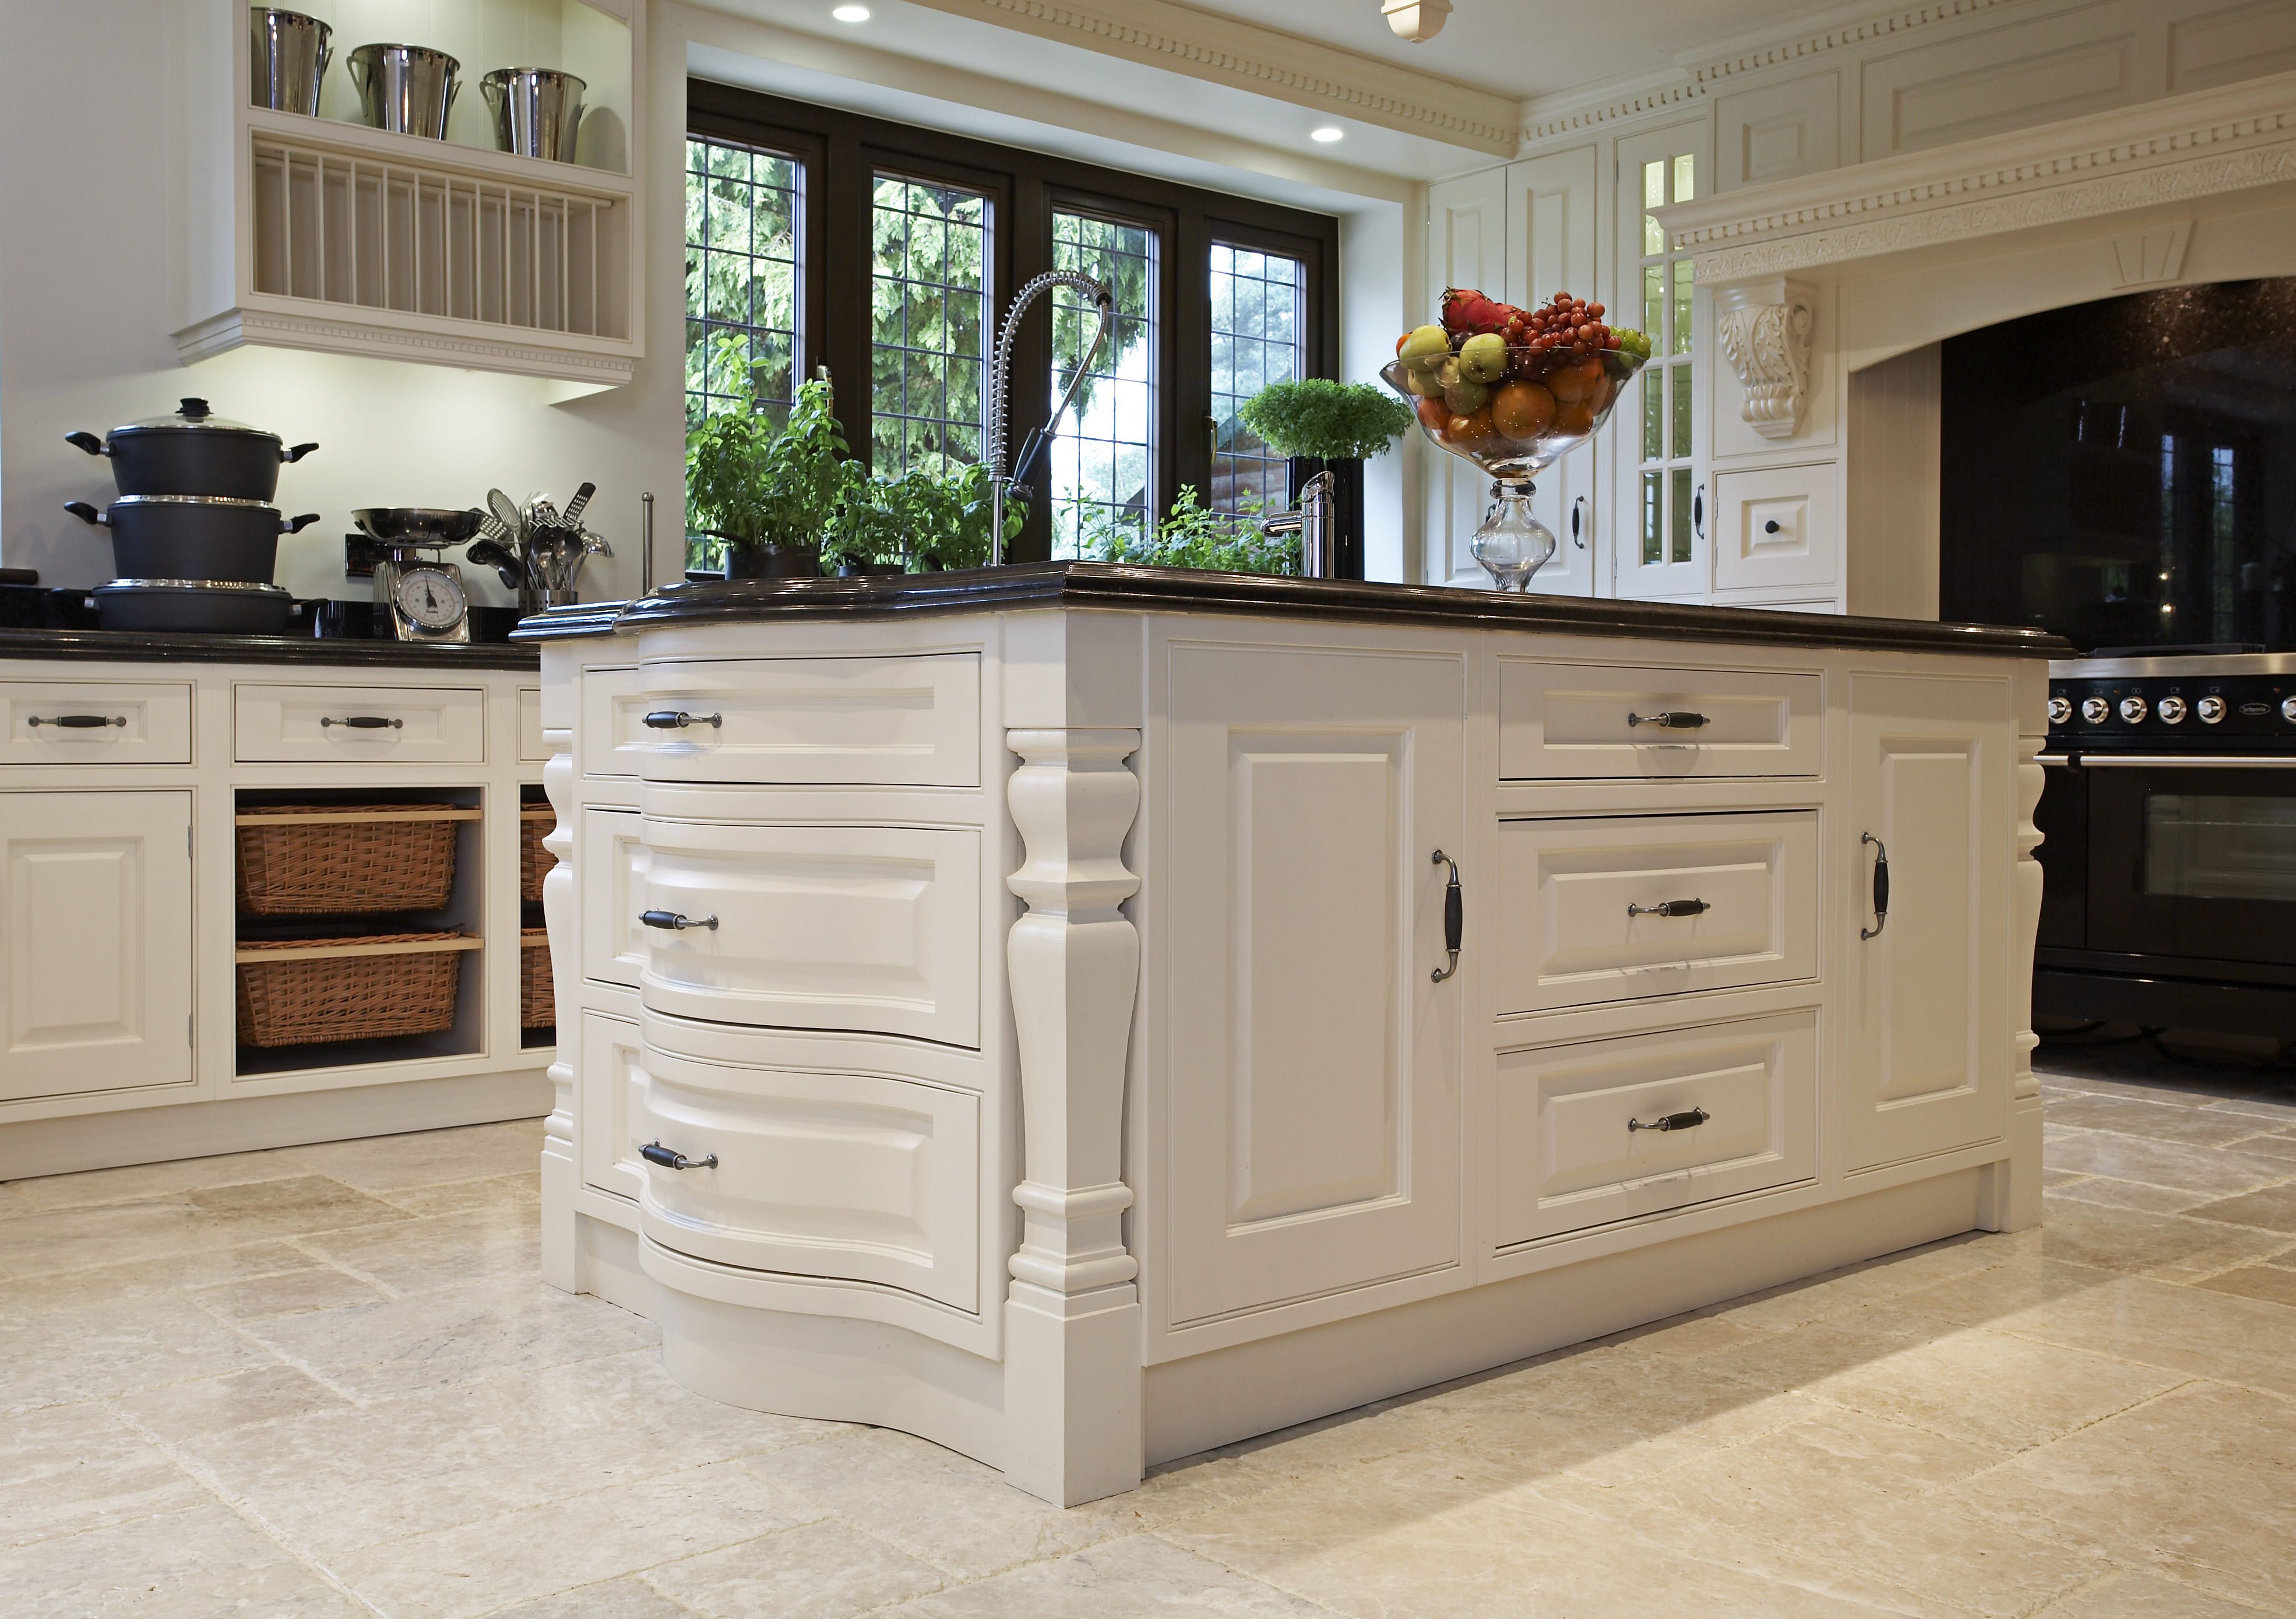 An ornate, bespoke kitchen island, white cabinets and a black worktop make up a striking piece.